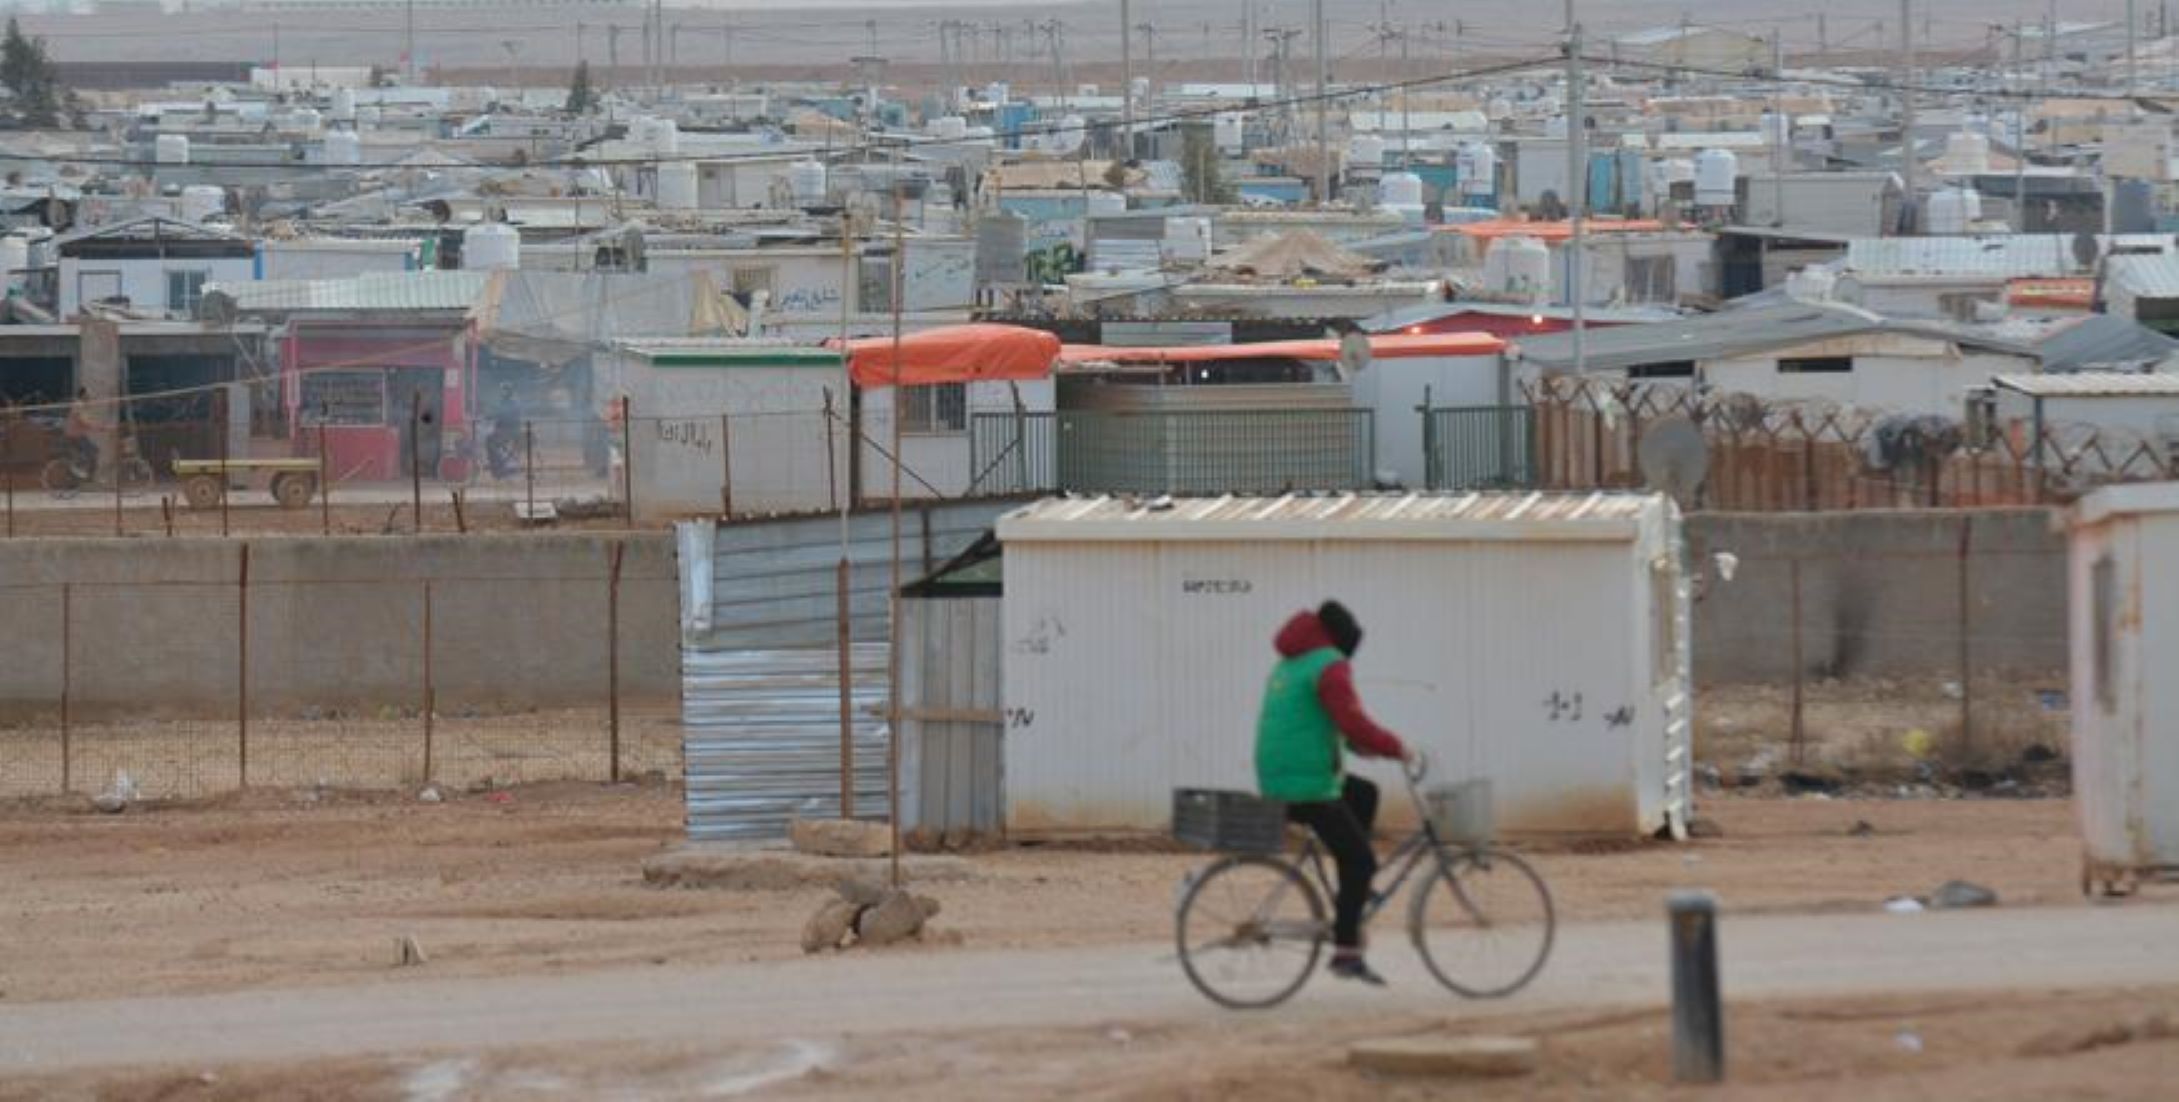 UN Refugee Agency Calls For Immediate Action To Address Funding Crisis In Jordan